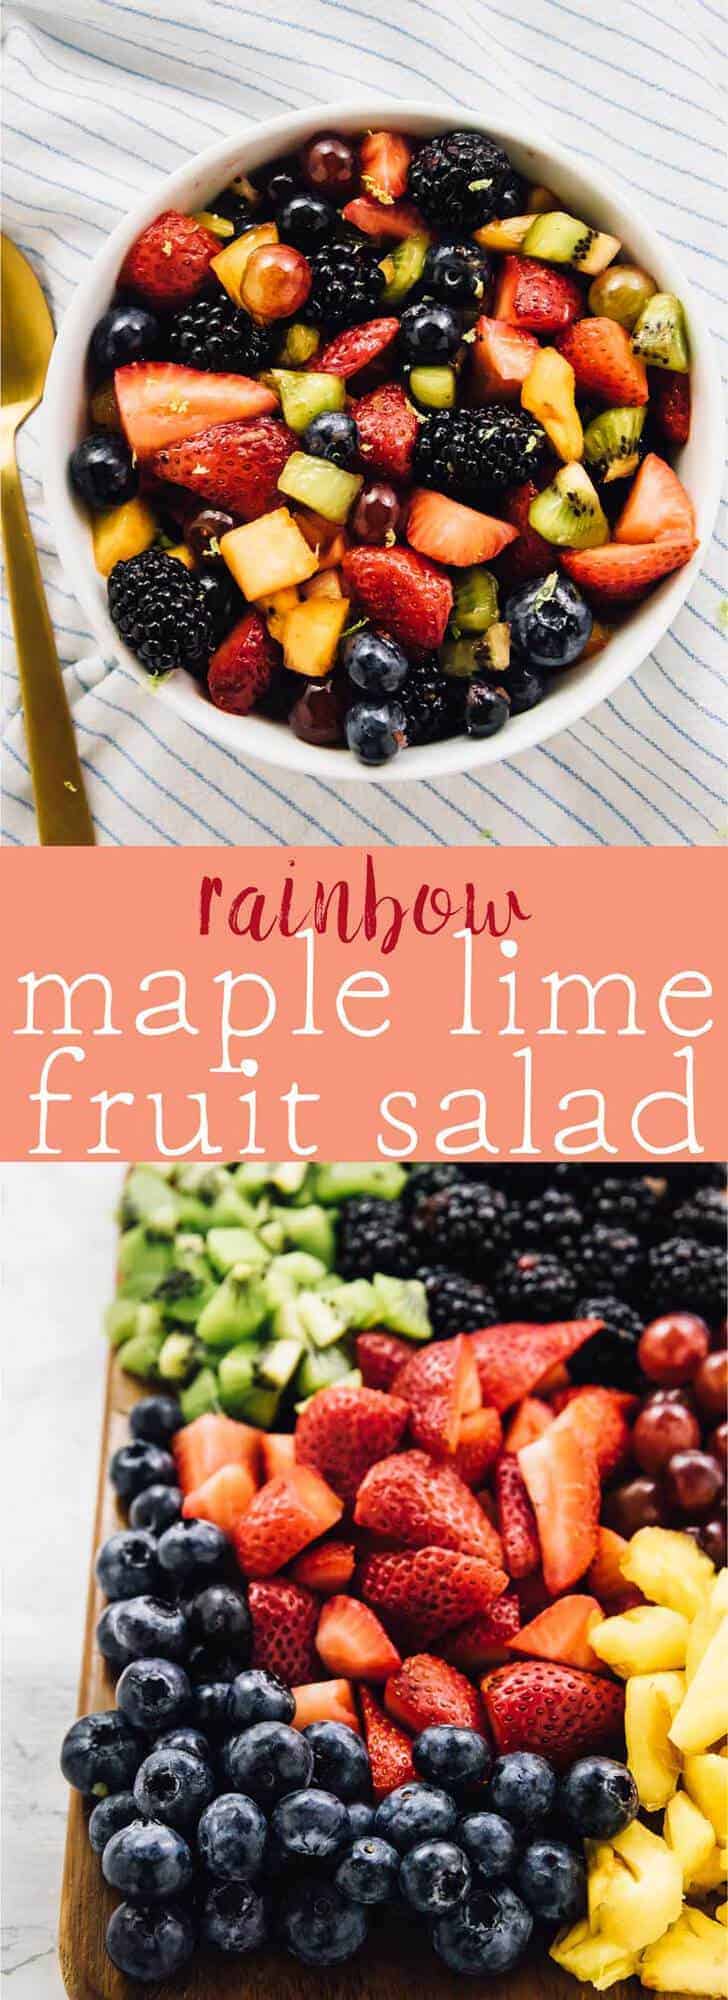 This beautiful Rainbow Fruit Salad with Maple Lime Dressing is loaded with so much delicious fruit flavour! It's a perfect quick snack, breakfast or even dessert and is vegan! via https://jessicainthekitchen.com